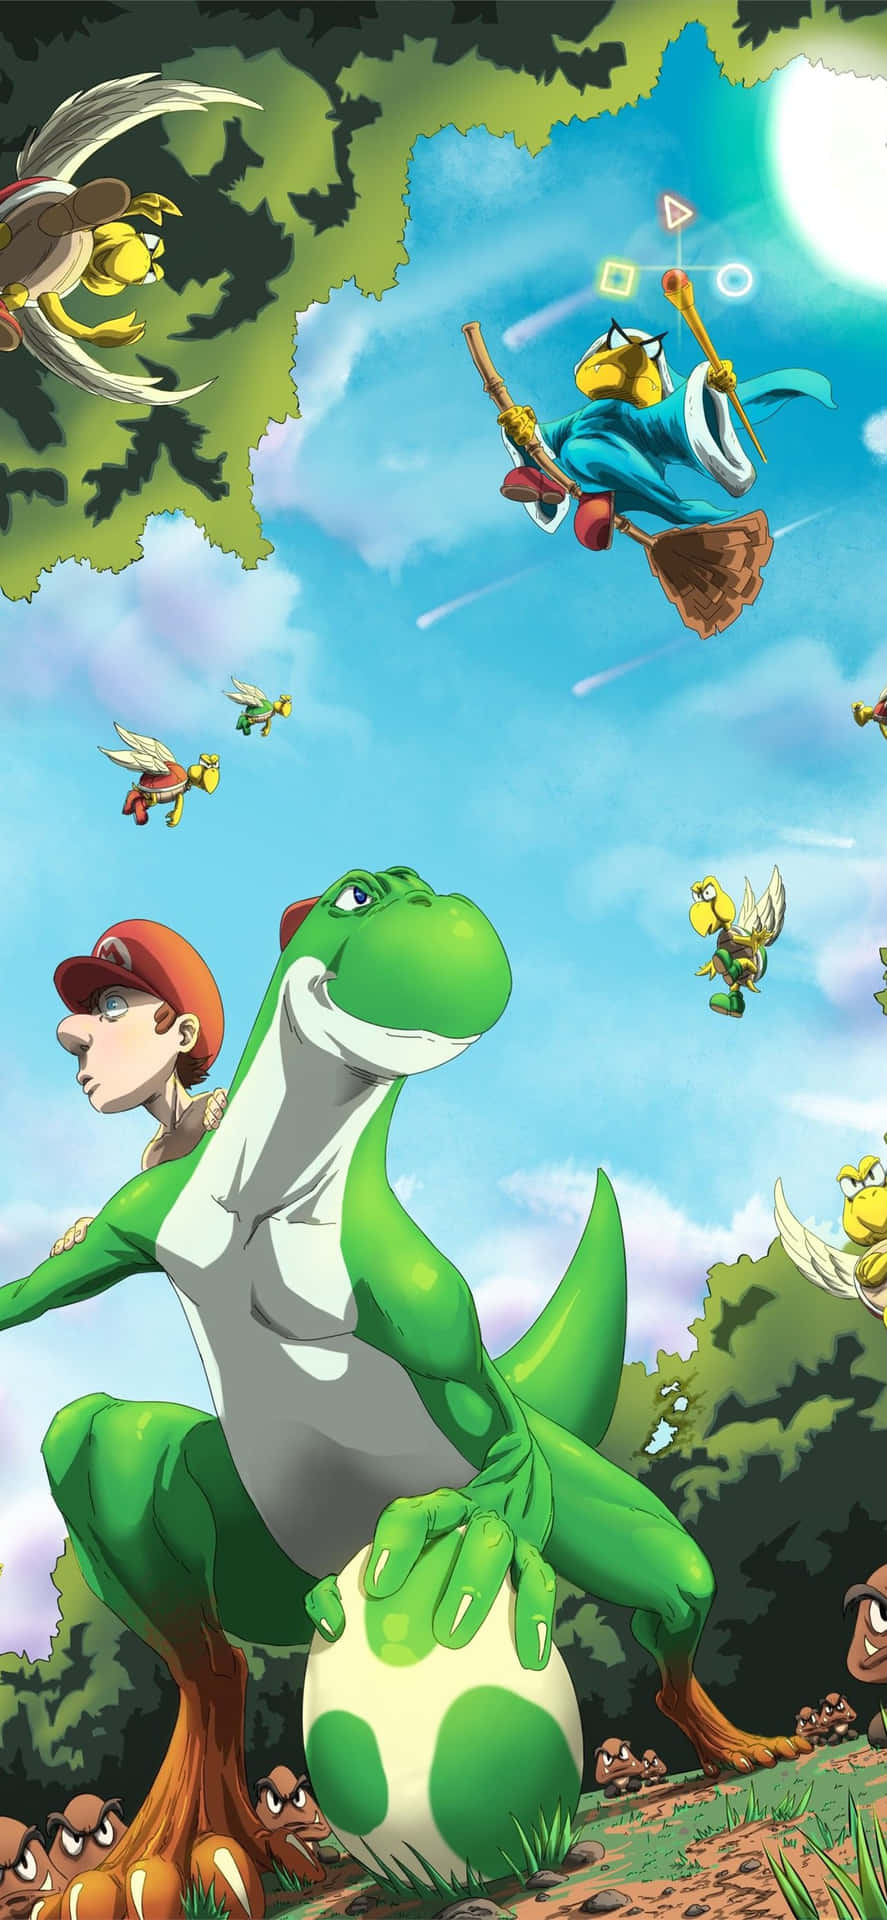 "Who's up for a fun adventure with Yoshi?" Wallpaper